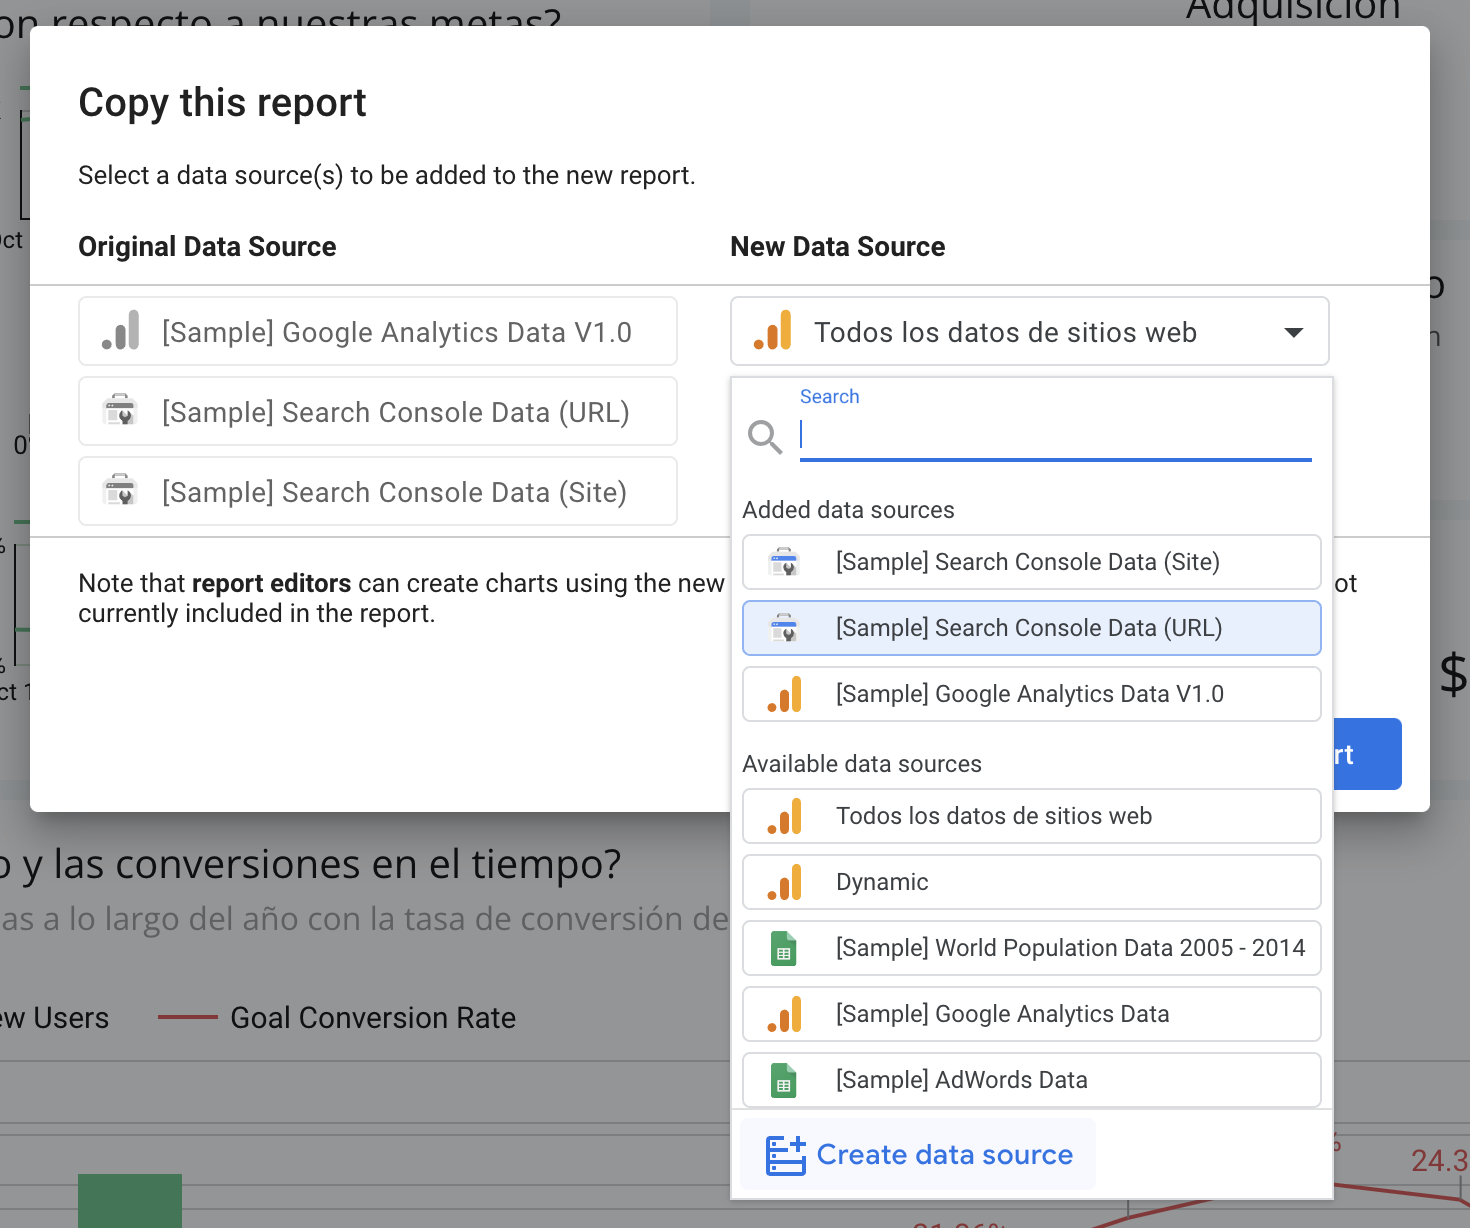 Image showing the Search Console Data (URL) highlighted in the Copy this report window.